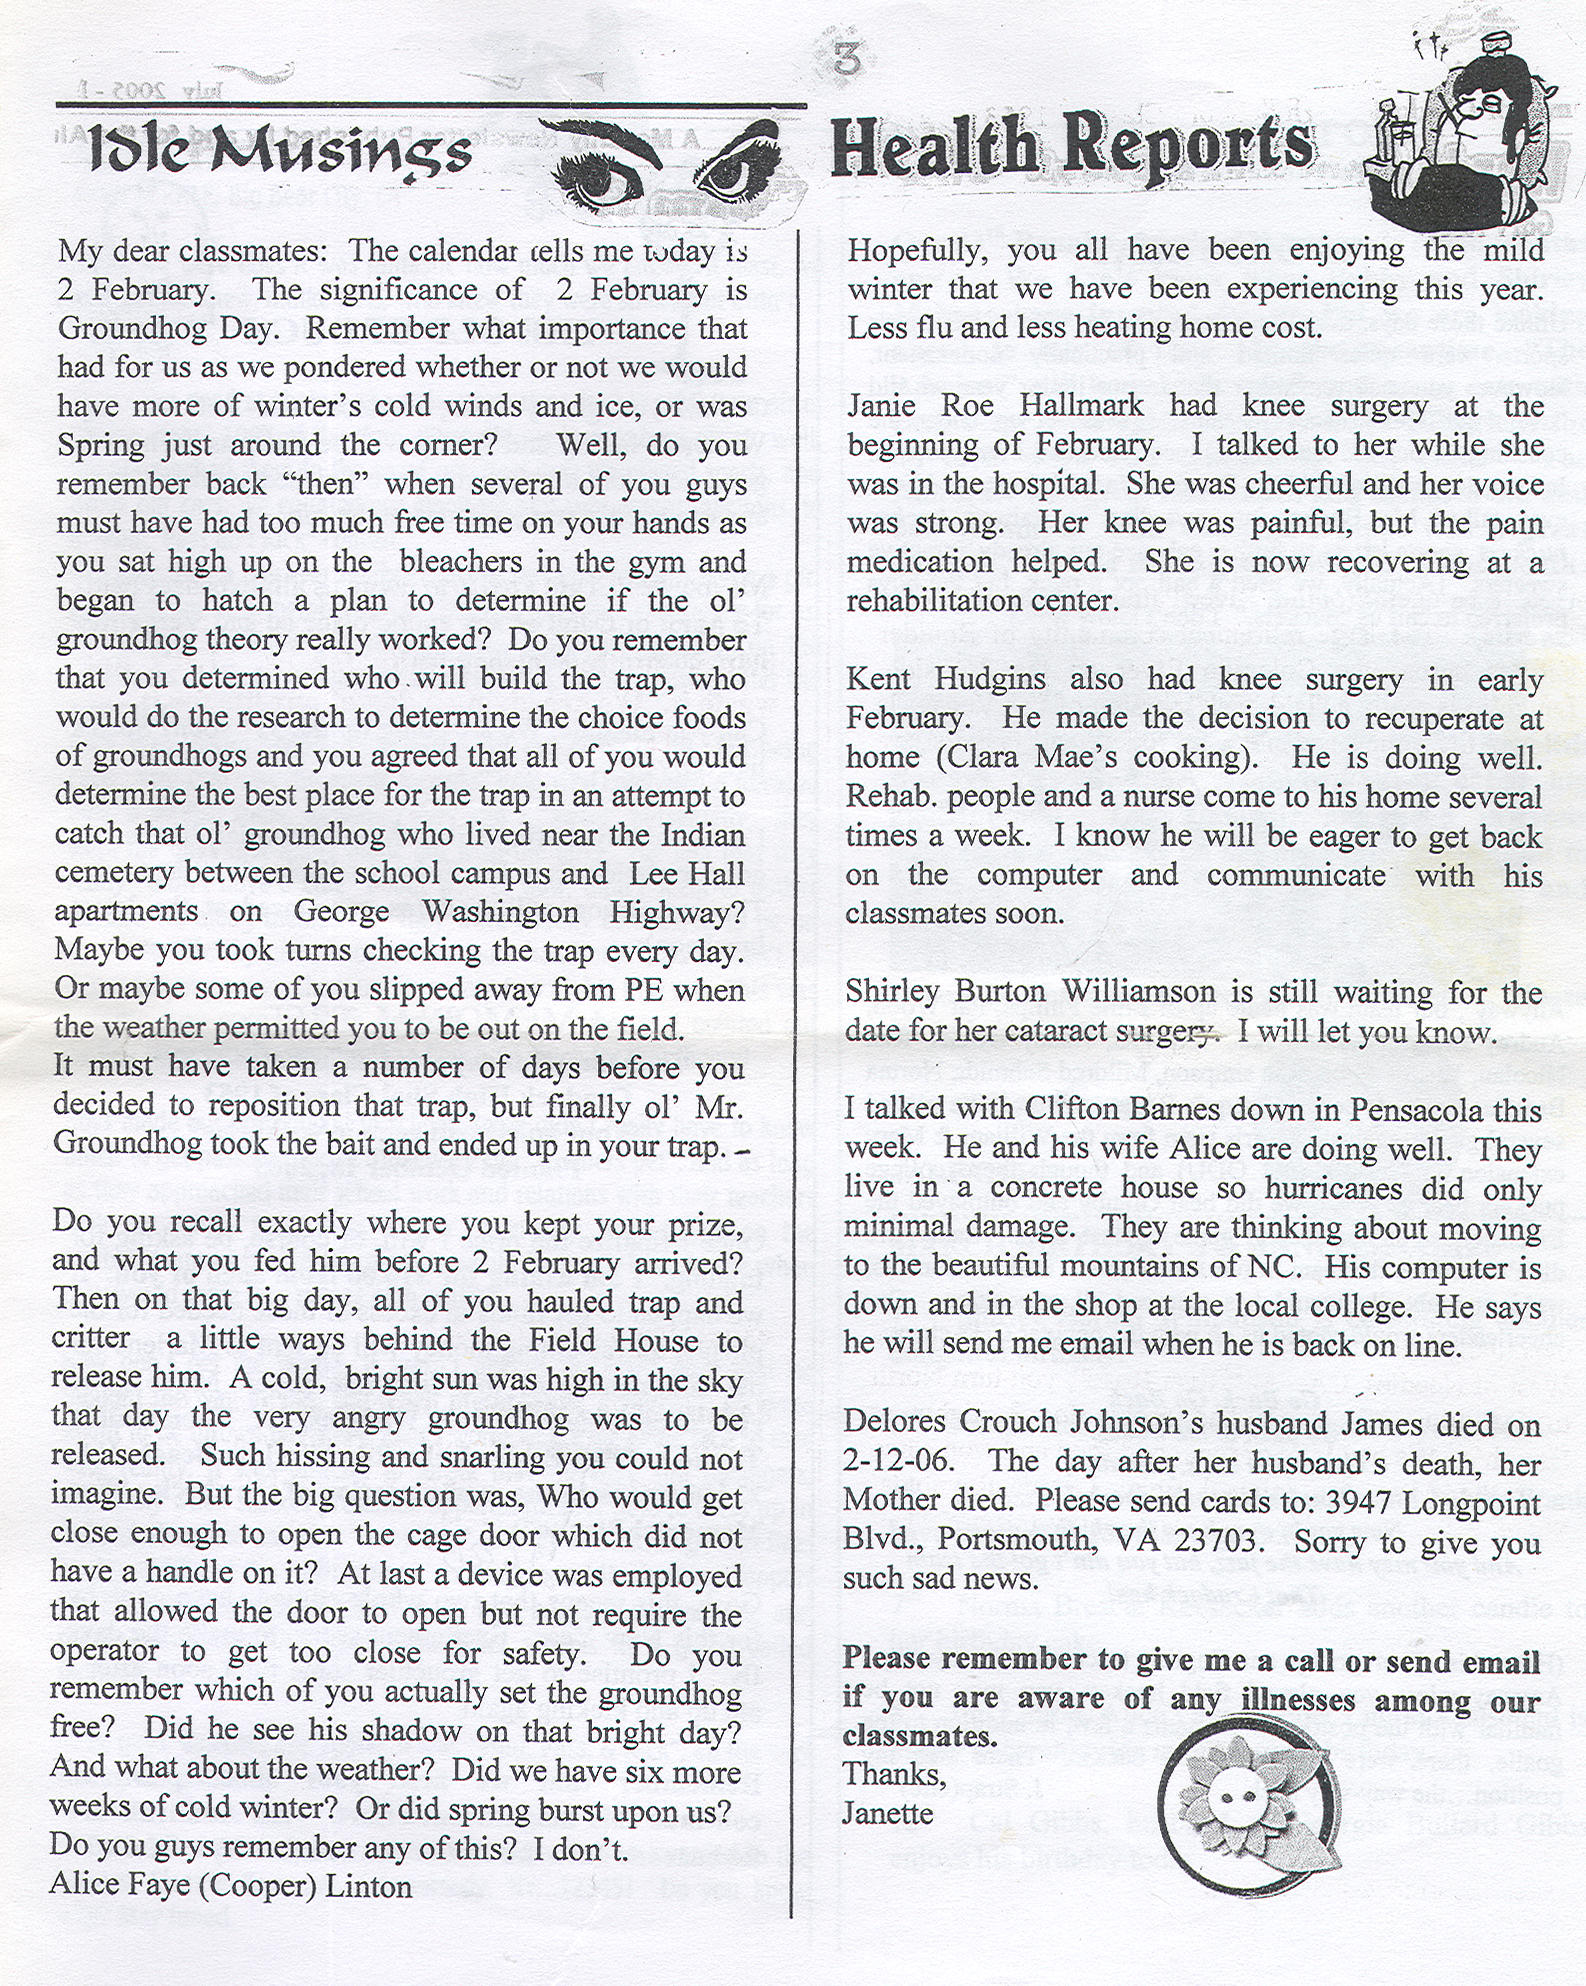 The Admiral - March 2006 - pg. 3